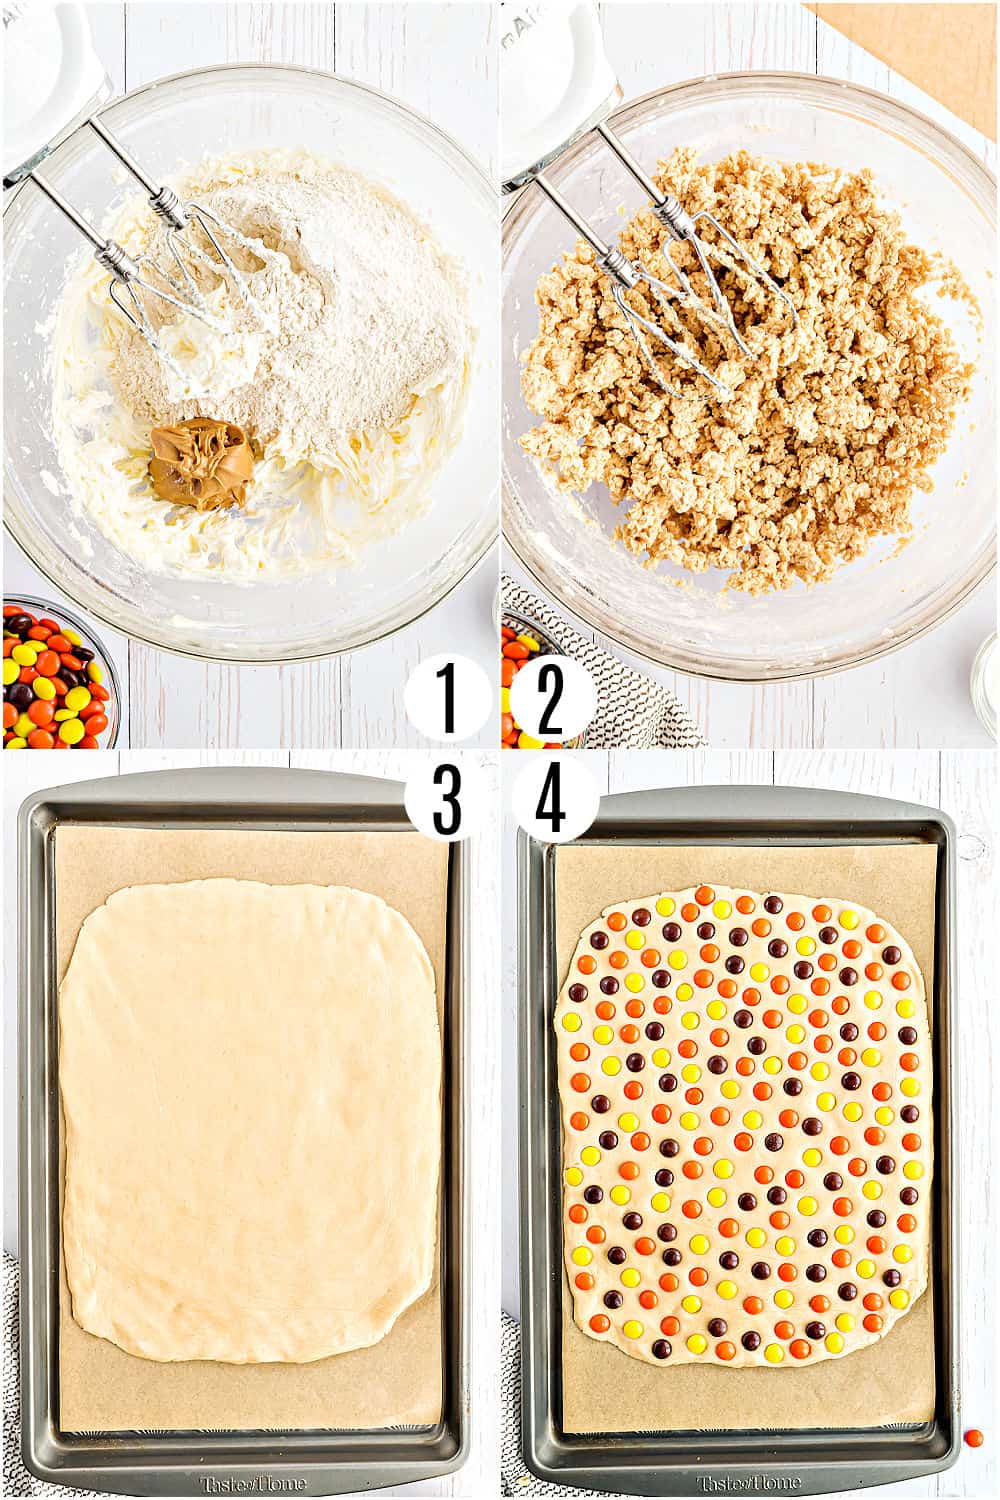 Step by step photos showing how to make peanut butter shortbread bars.